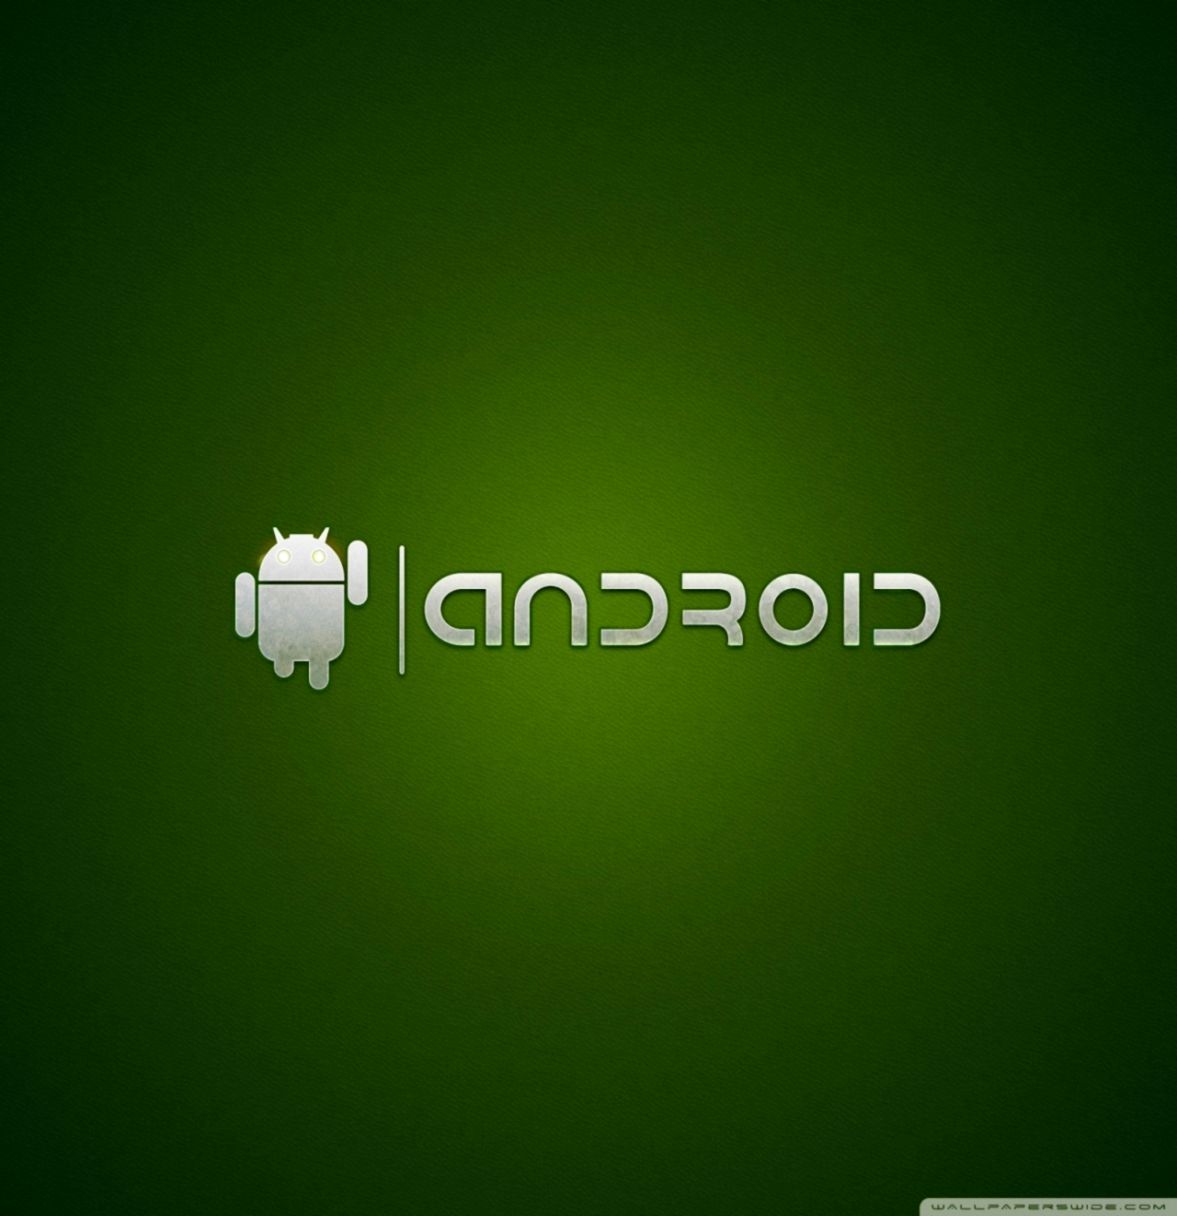 Android Logo 4k Wallpapers - Wallpaper Cave